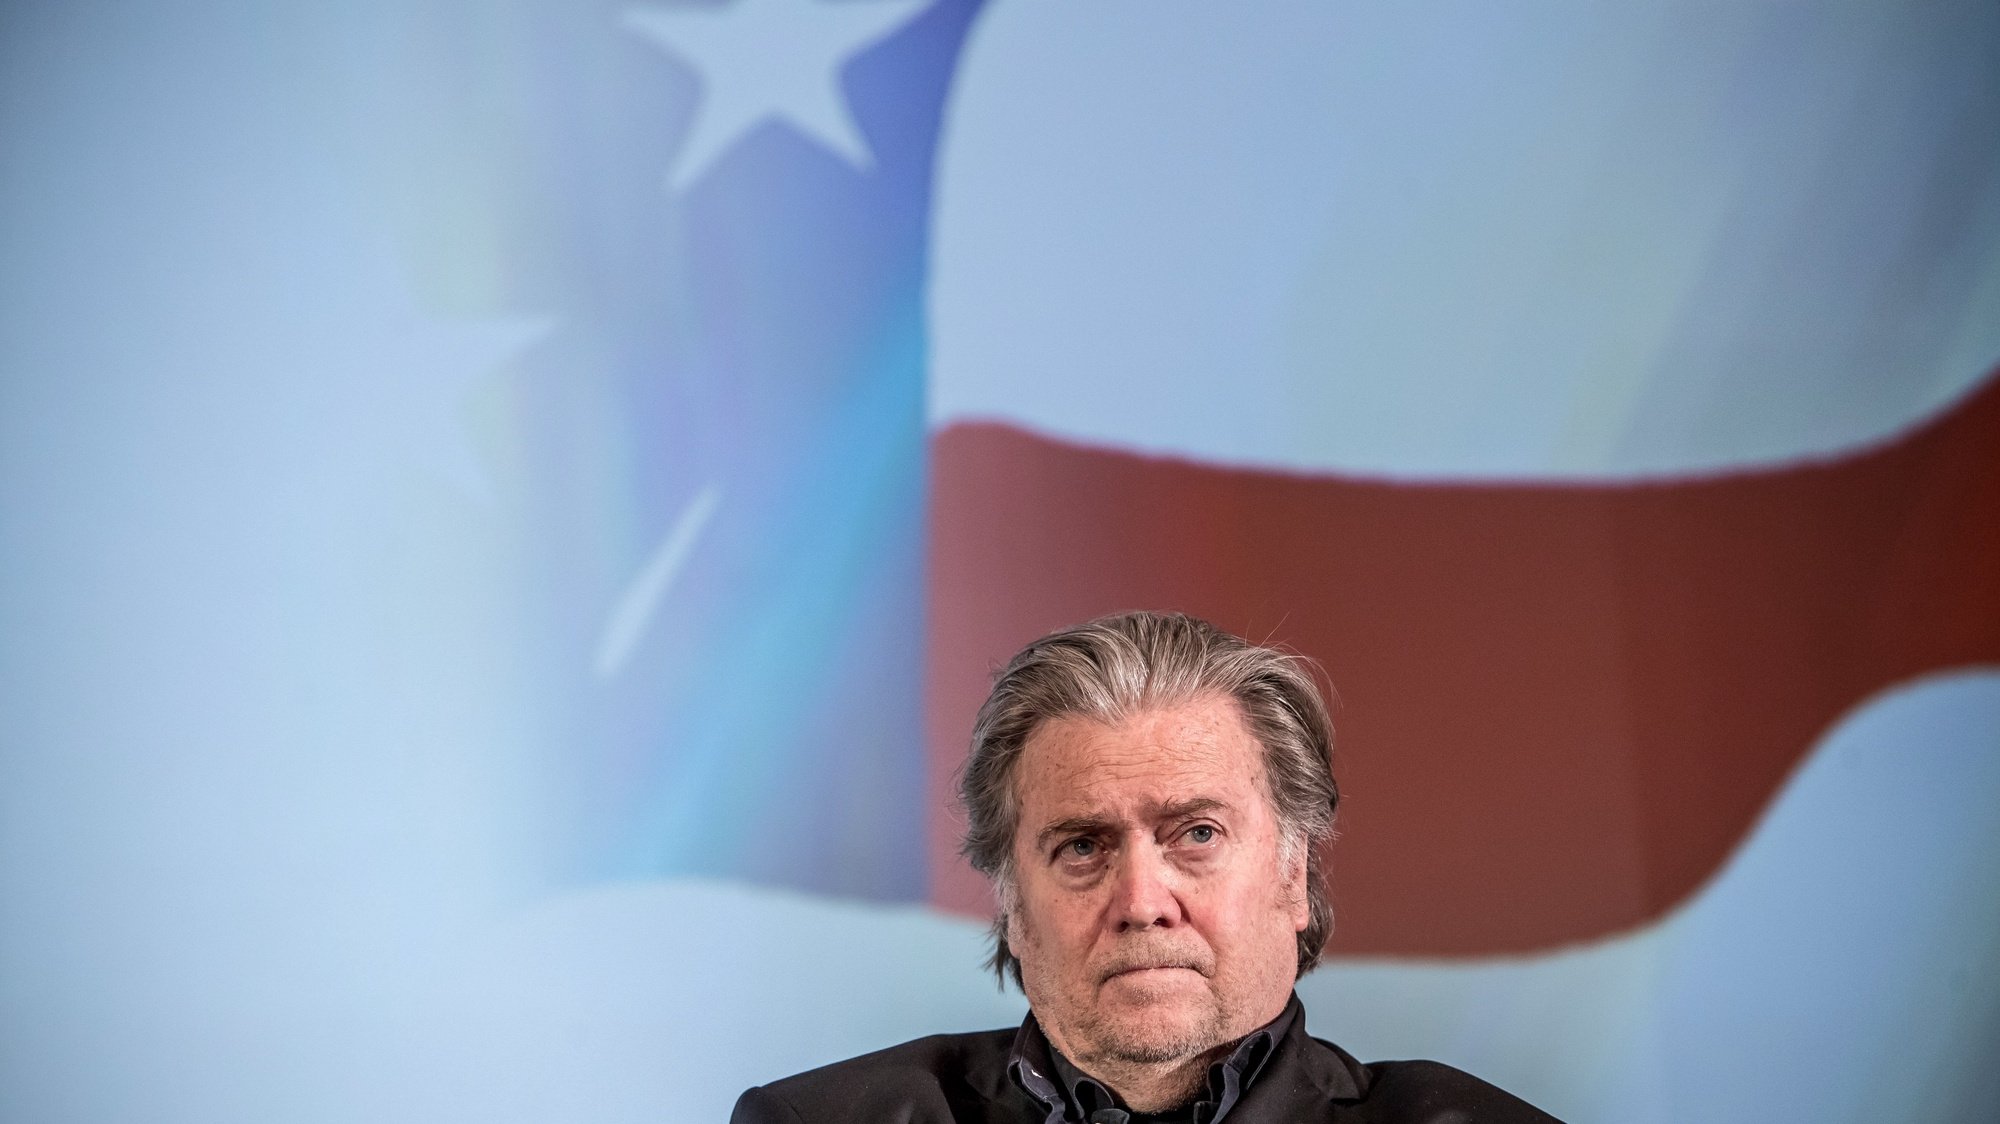 epa09537827 (FILE) - Former Trump political strategist Steve Bannon attends a discussion meeting in Prague, Czech Republic, 22 May 2018 (reissued 21 October 2021). The House of Representatives on 21 October 2021 voted to hold former White House strategist in the Trump administration, Stephen Bannon, in criminal contempt of Congress for refusing to comply with a subpoena issued by the House Select Committee on the 06 January Attack.  EPA/MARTIN DIVISEK *** Local Caption *** 56633219